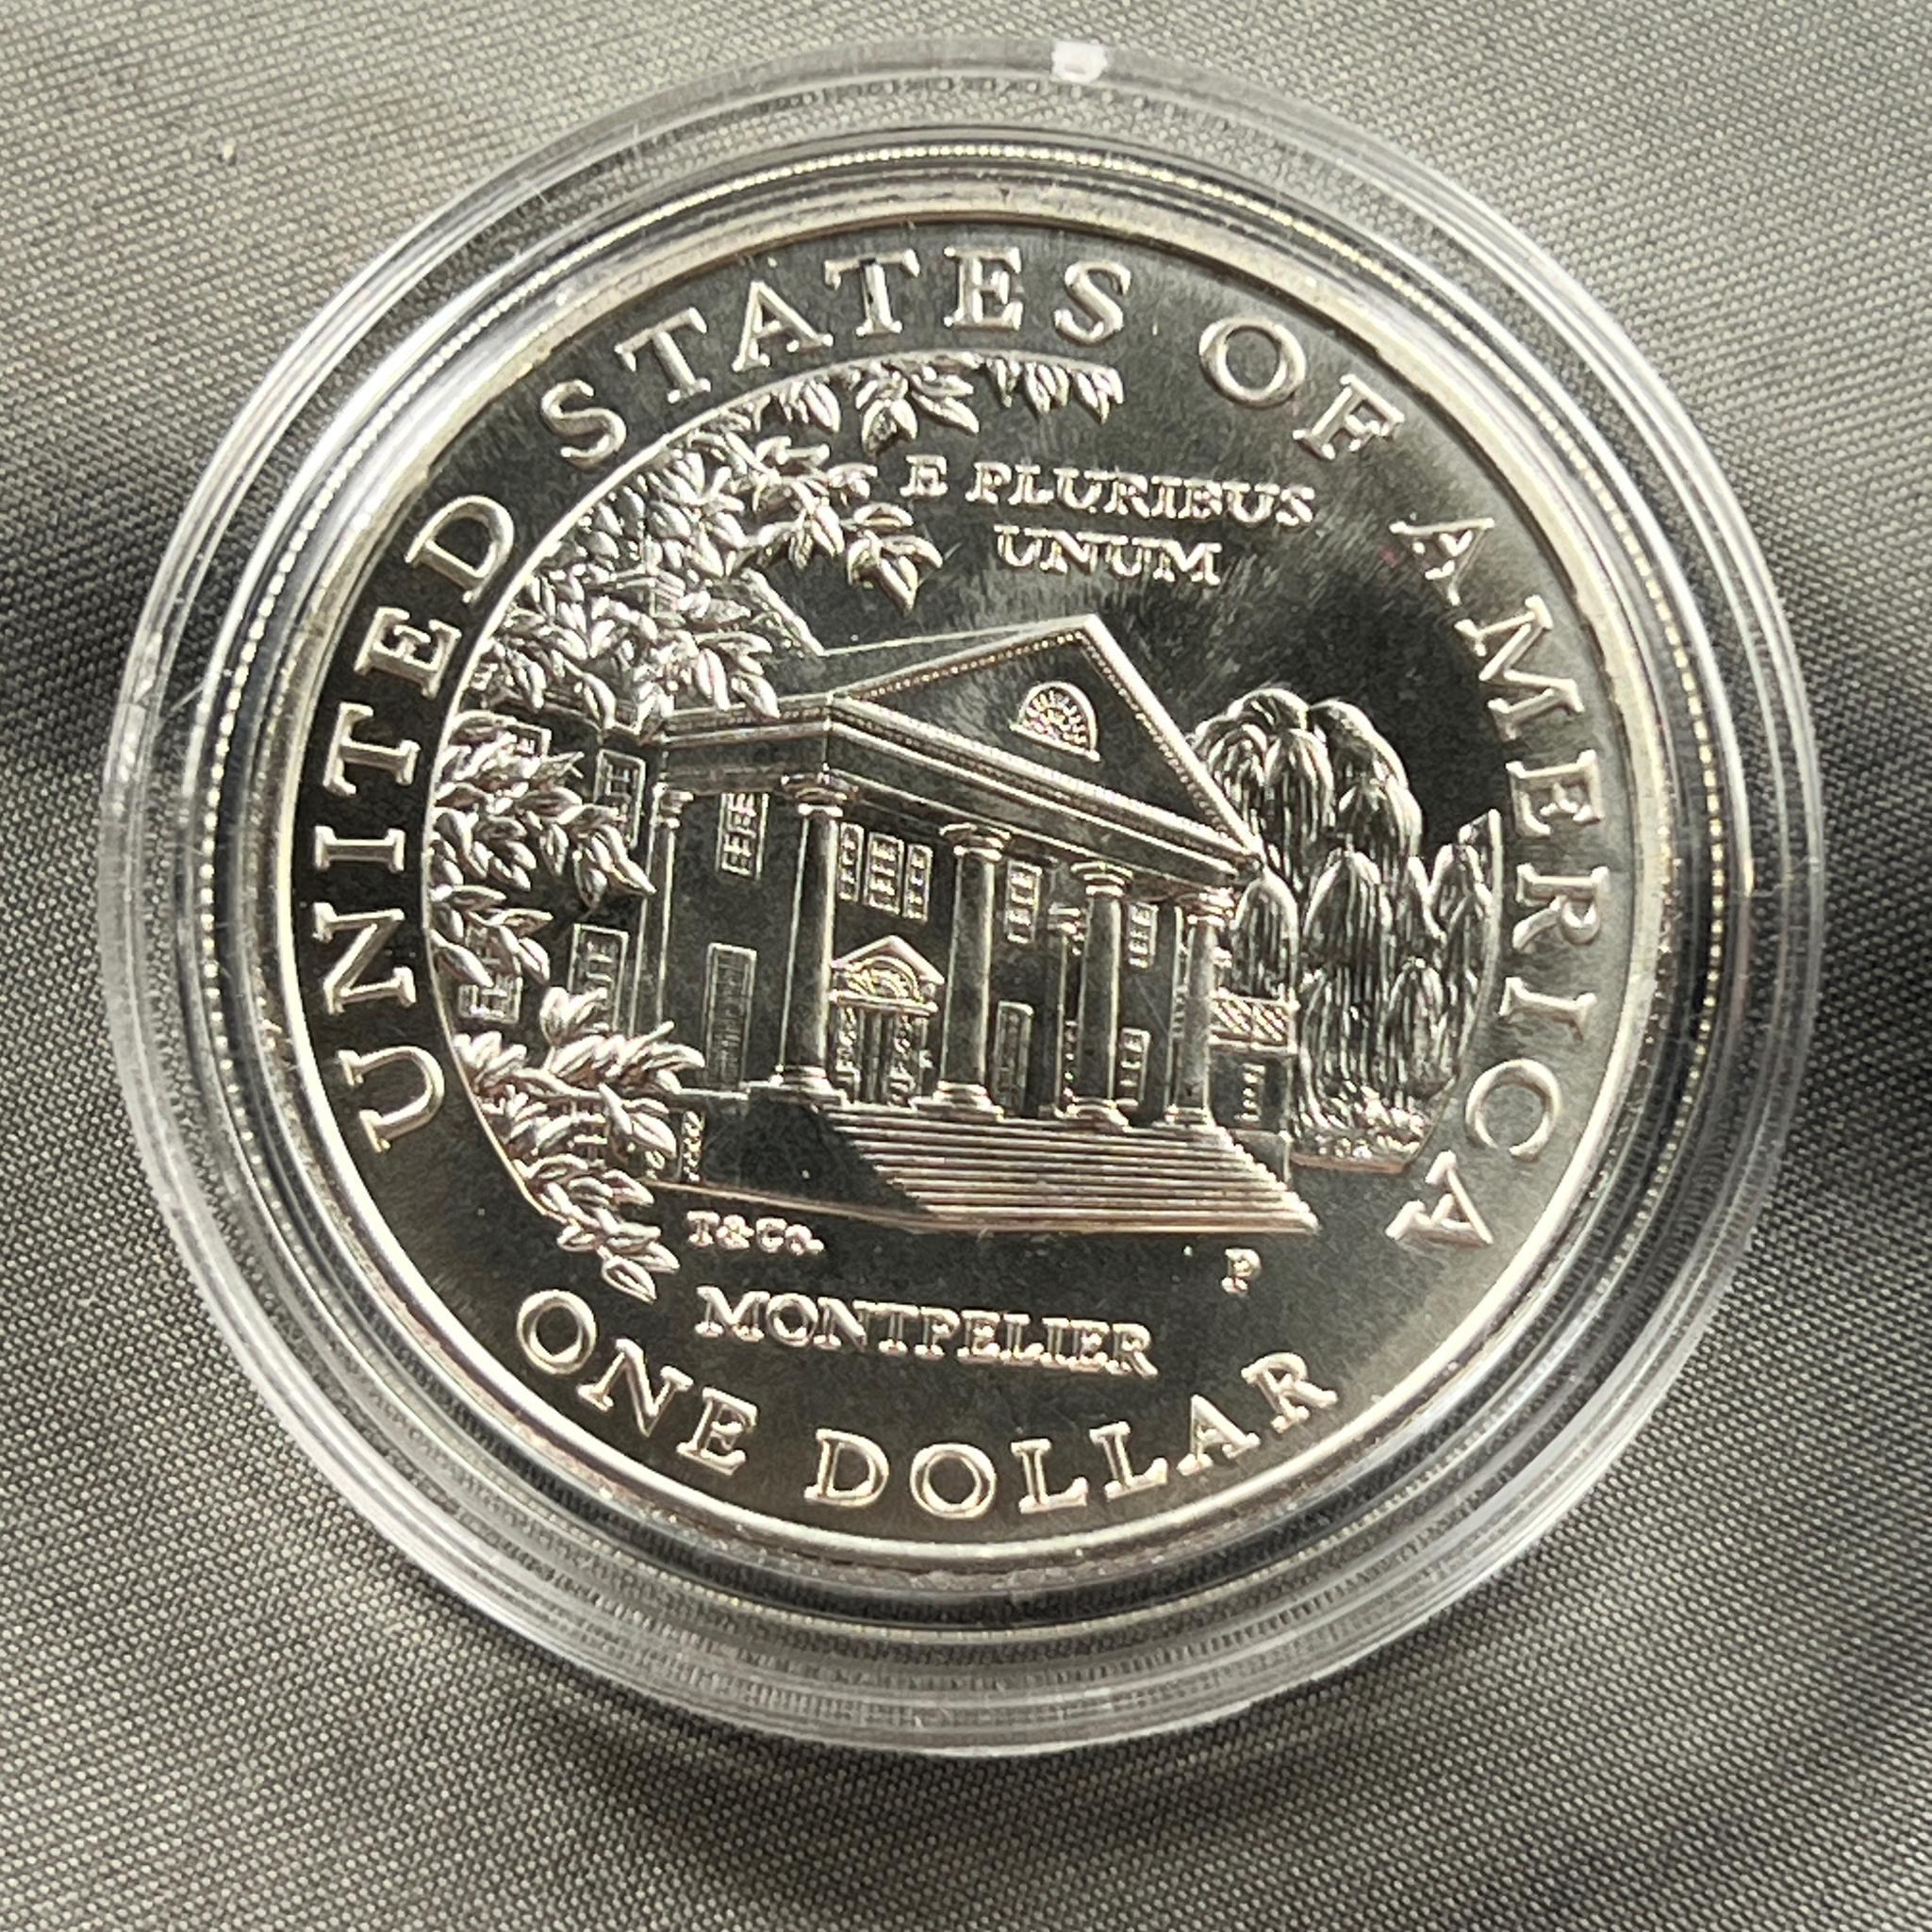 1999-P Dolley Madison Commemorative US Dollar coin, 90% Silver